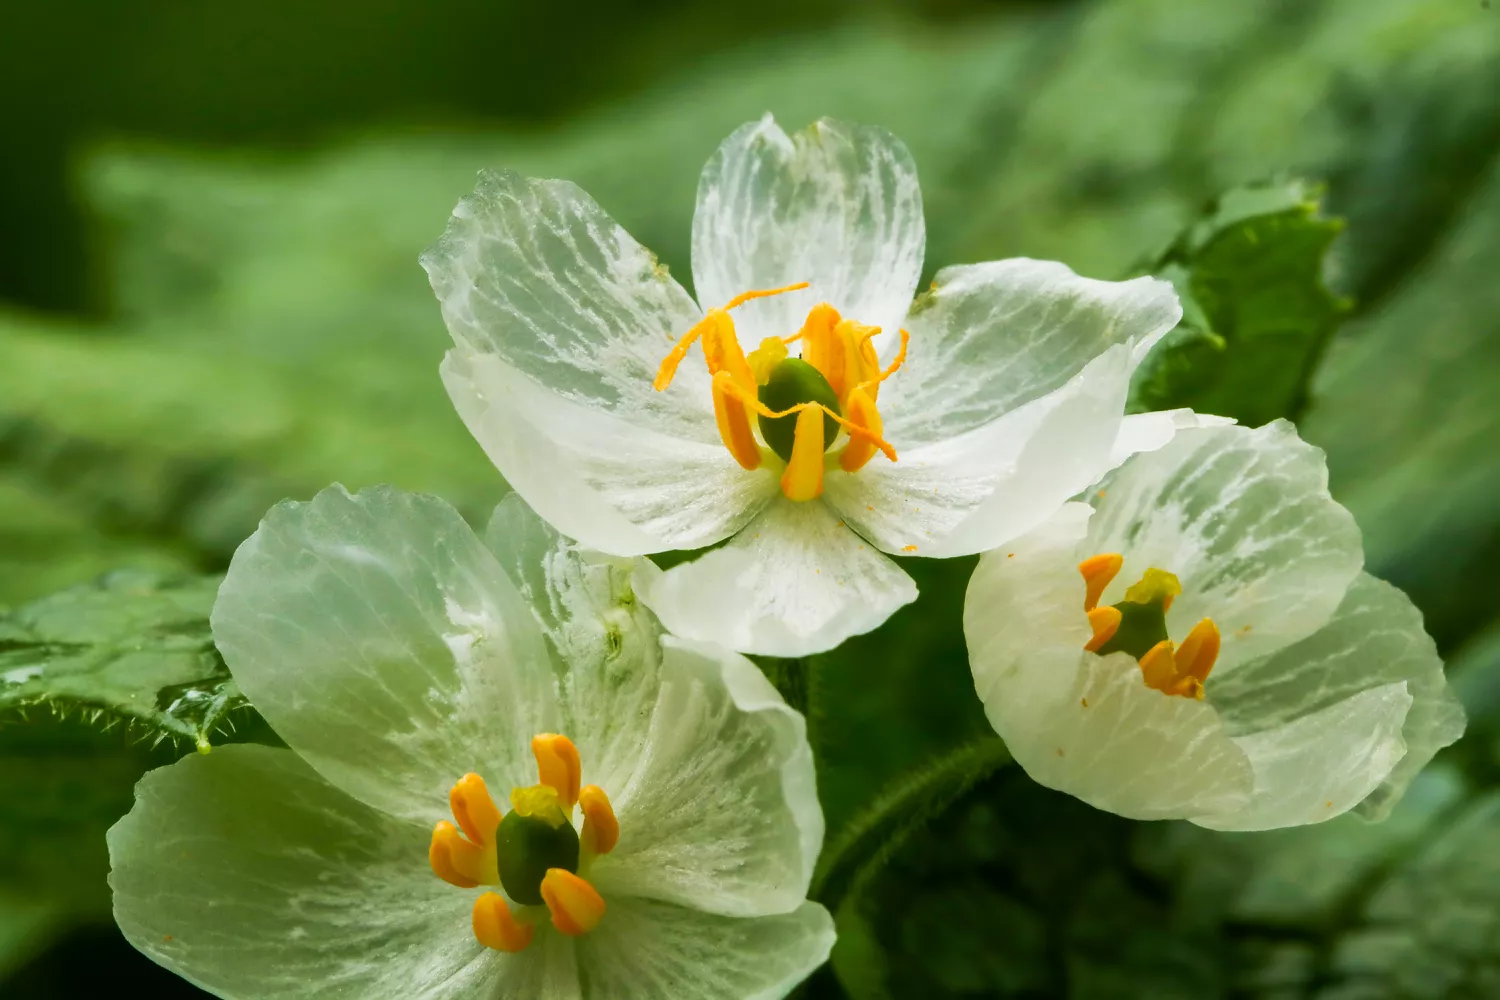 Skeleton Flowers Turn Clear When It Rains—Here’s How to Grow and Care for This Unusual Perennial